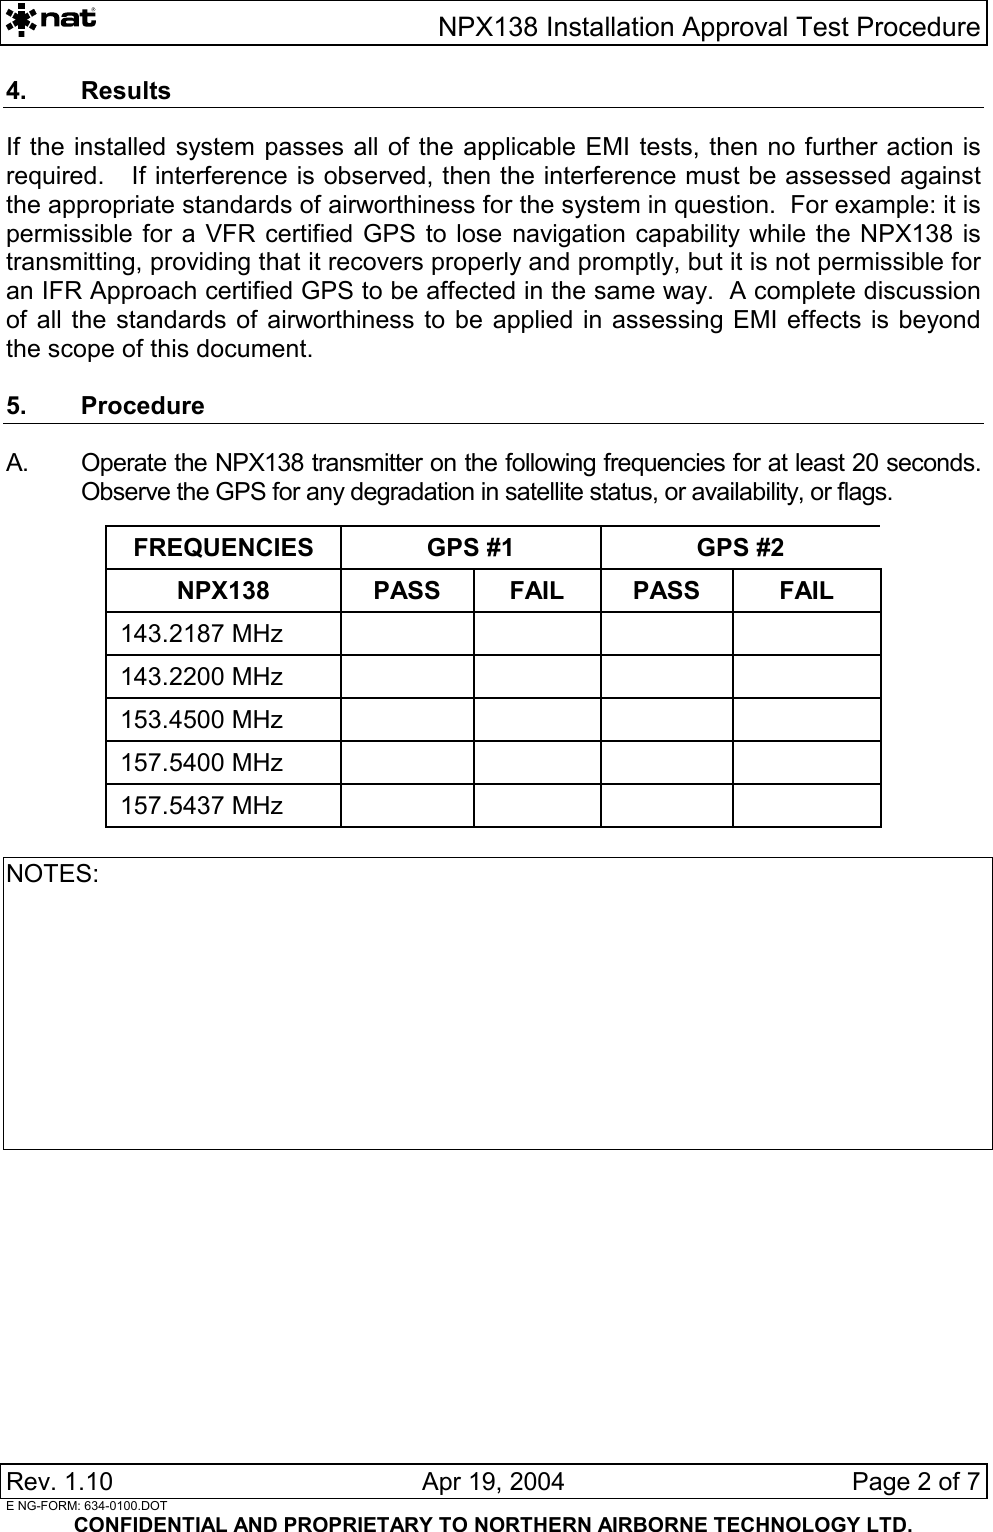   NPX138 Installation Approval Test Procedure Rev. 1.10   Apr 19, 2004  Page 2 of 7  E NG-FORM: 634-0100.DOT CONFIDENTIAL AND PROPRIETARY TO NORTHERN AIRBORNE TECHNOLOGY LTD. 4. Results If the installed system passes all of the applicable EMI tests, then no further action is required.   If interference is observed, then the interference must be assessed against the appropriate standards of airworthiness for the system in question.  For example: it is permissible for a VFR certified GPS to lose navigation capability while the NPX138 is transmitting, providing that it recovers properly and promptly, but it is not permissible for an IFR Approach certified GPS to be affected in the same way.  A complete discussion of all the standards of airworthiness to be applied in assessing EMI effects is beyond the scope of this document.  5. Procedure A.  Operate the NPX138 transmitter on the following frequencies for at least 20 seconds.  Observe the GPS for any degradation in satellite status, or availability, or flags.  FREQUENCIES  GPS #1  GPS #2 NPX138 PASS FAIL PASS FAIL 143.2187 MHz     143.2200 MHz     153.4500 MHz     157.5400 MHz     157.5437 MHz      NOTES:          